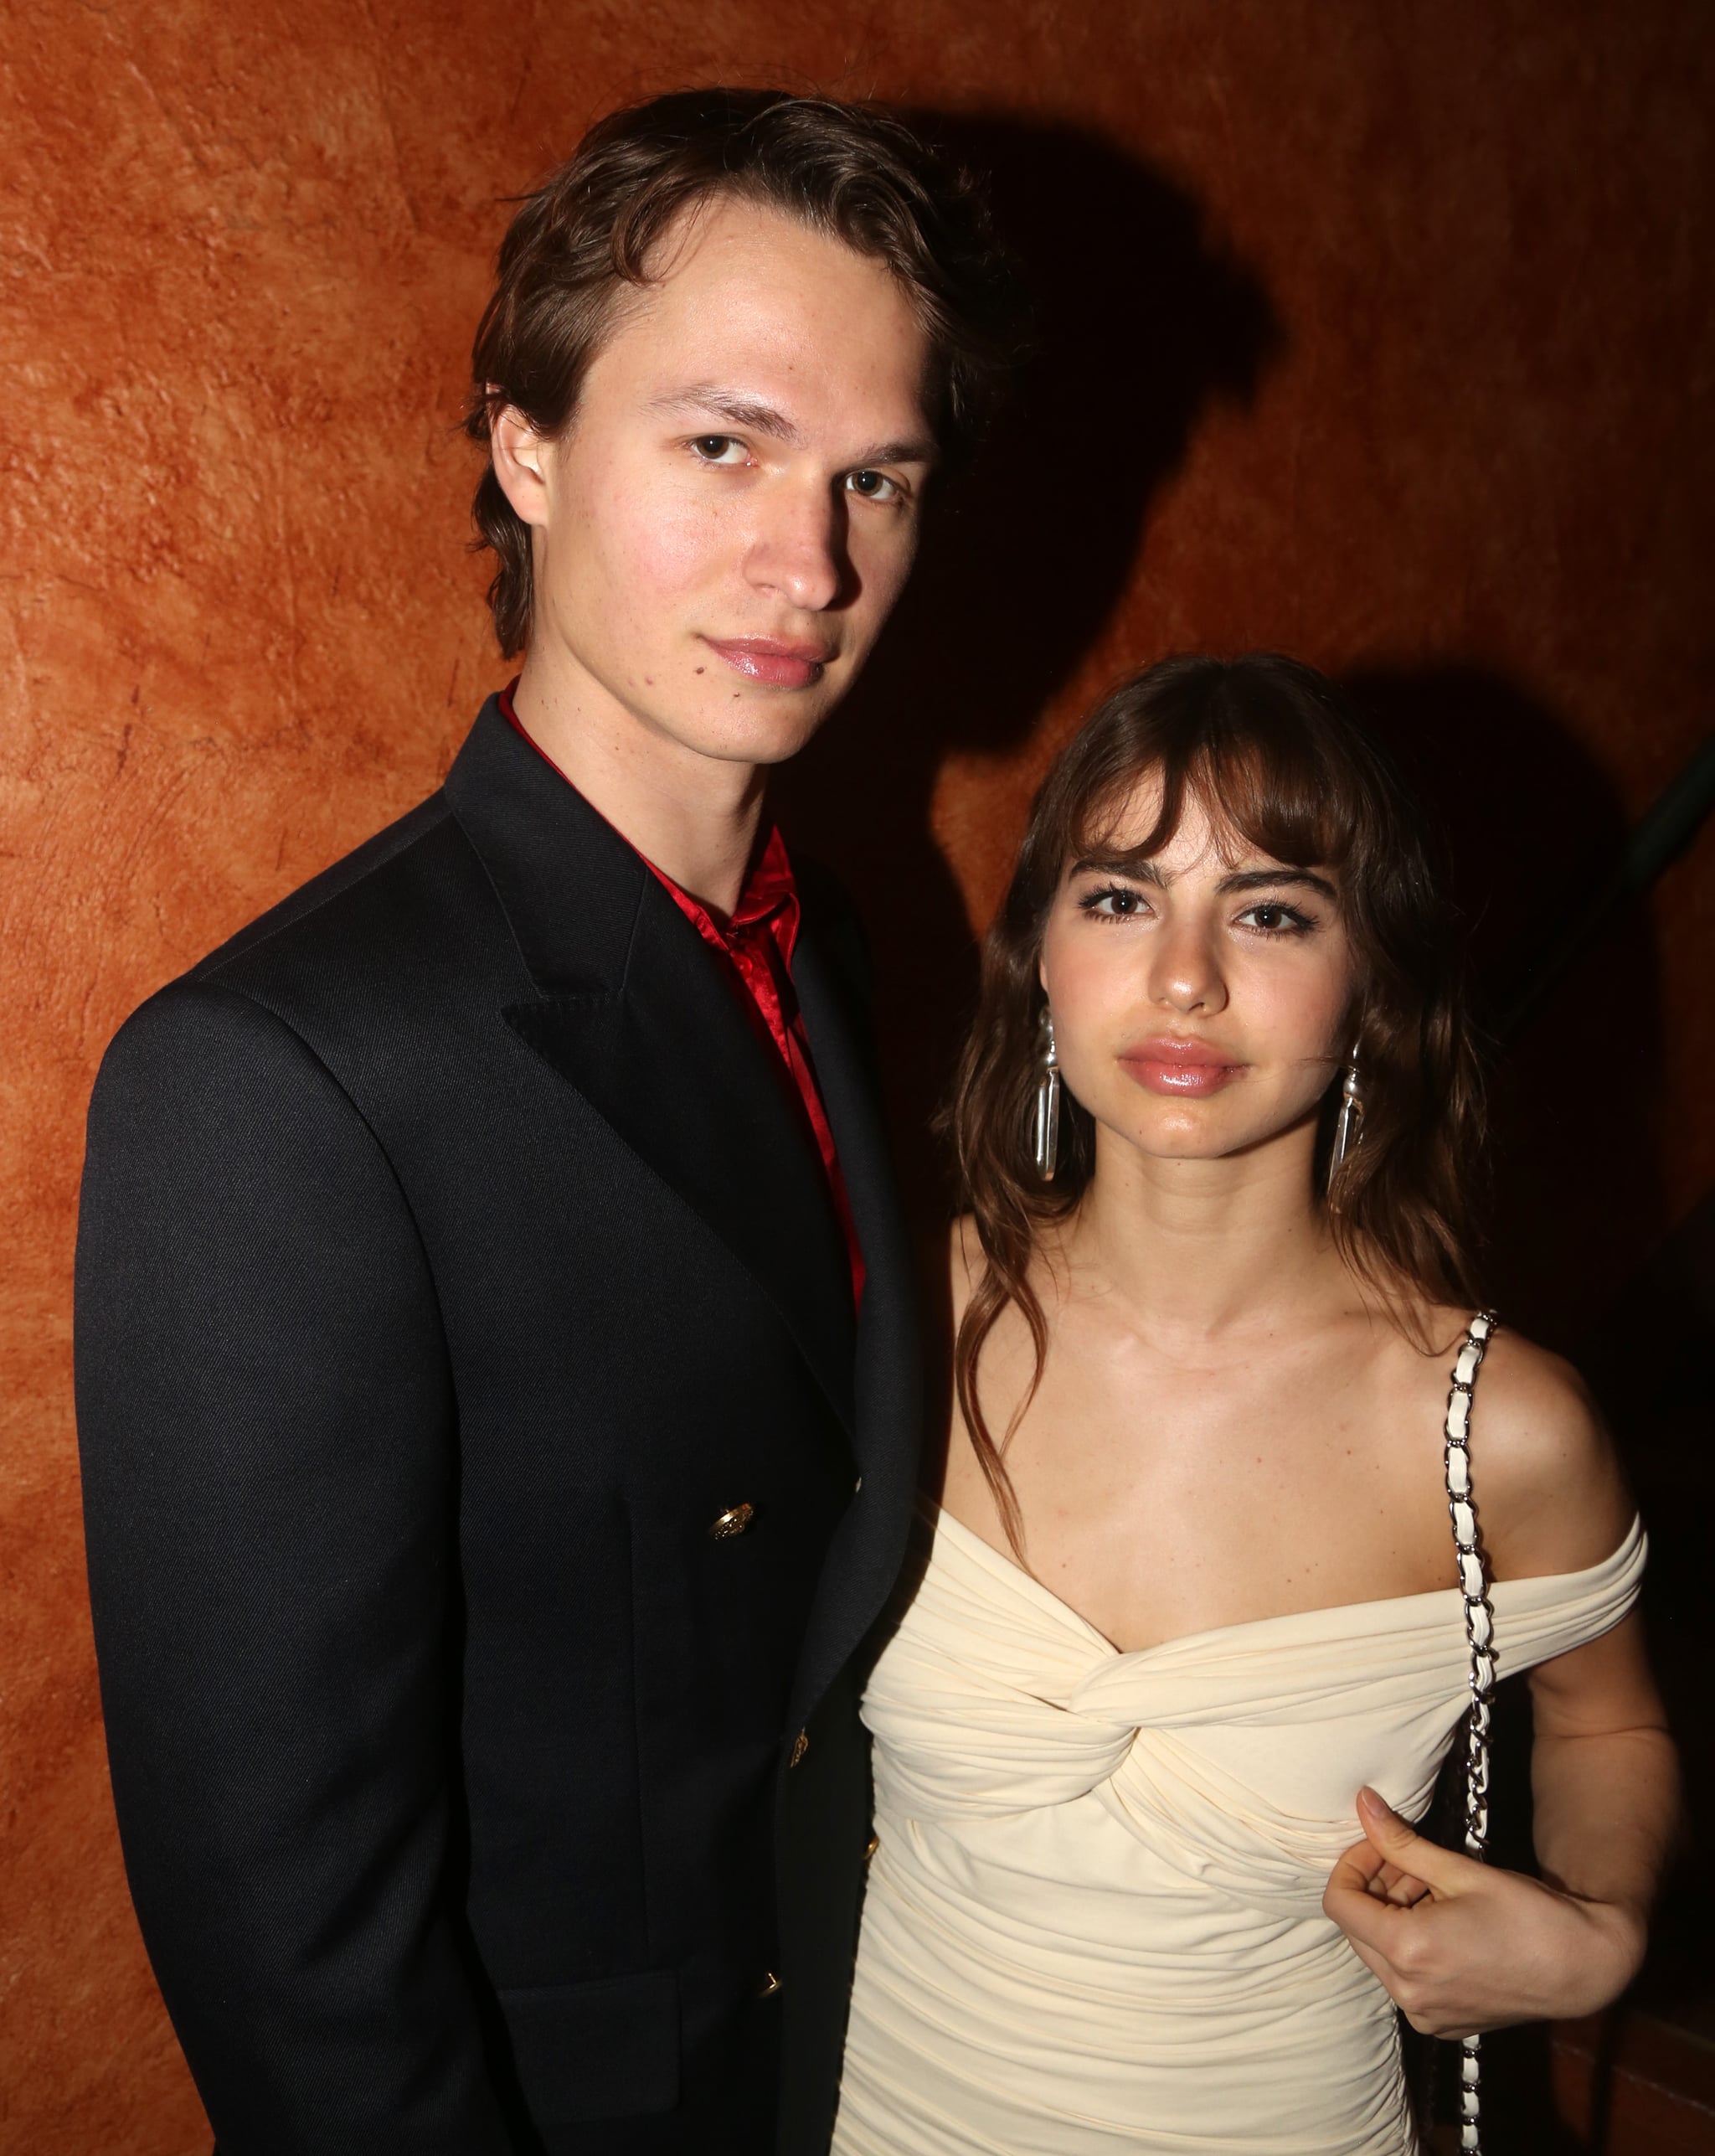 NEW YORK, NEW YORK - APRIL 24: Ansel Elgort and Violetta Komyshan pose at the opening night of the musical 